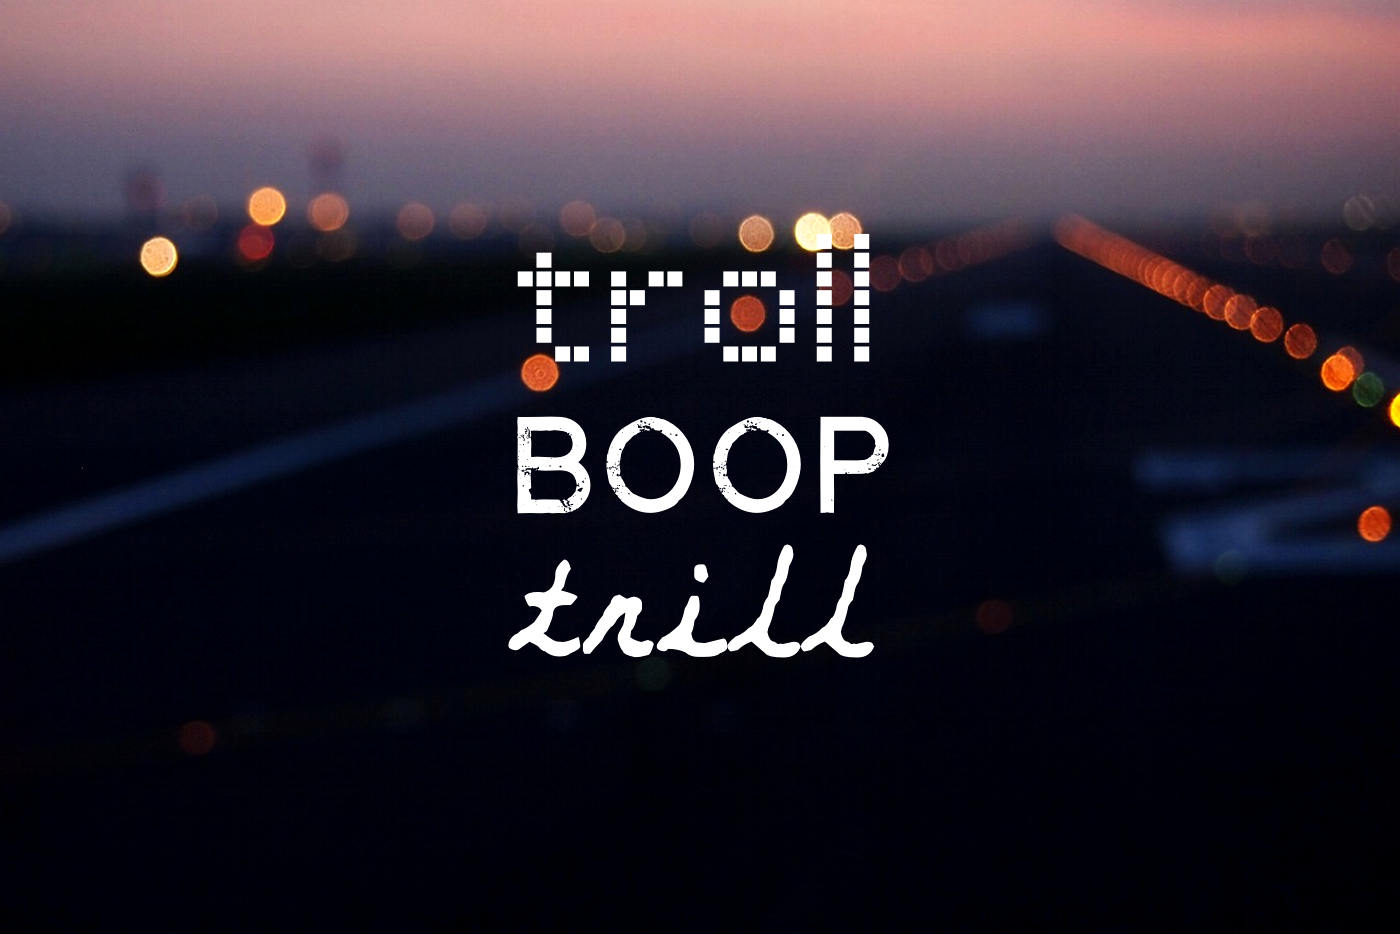 Troll, boop, trill and others